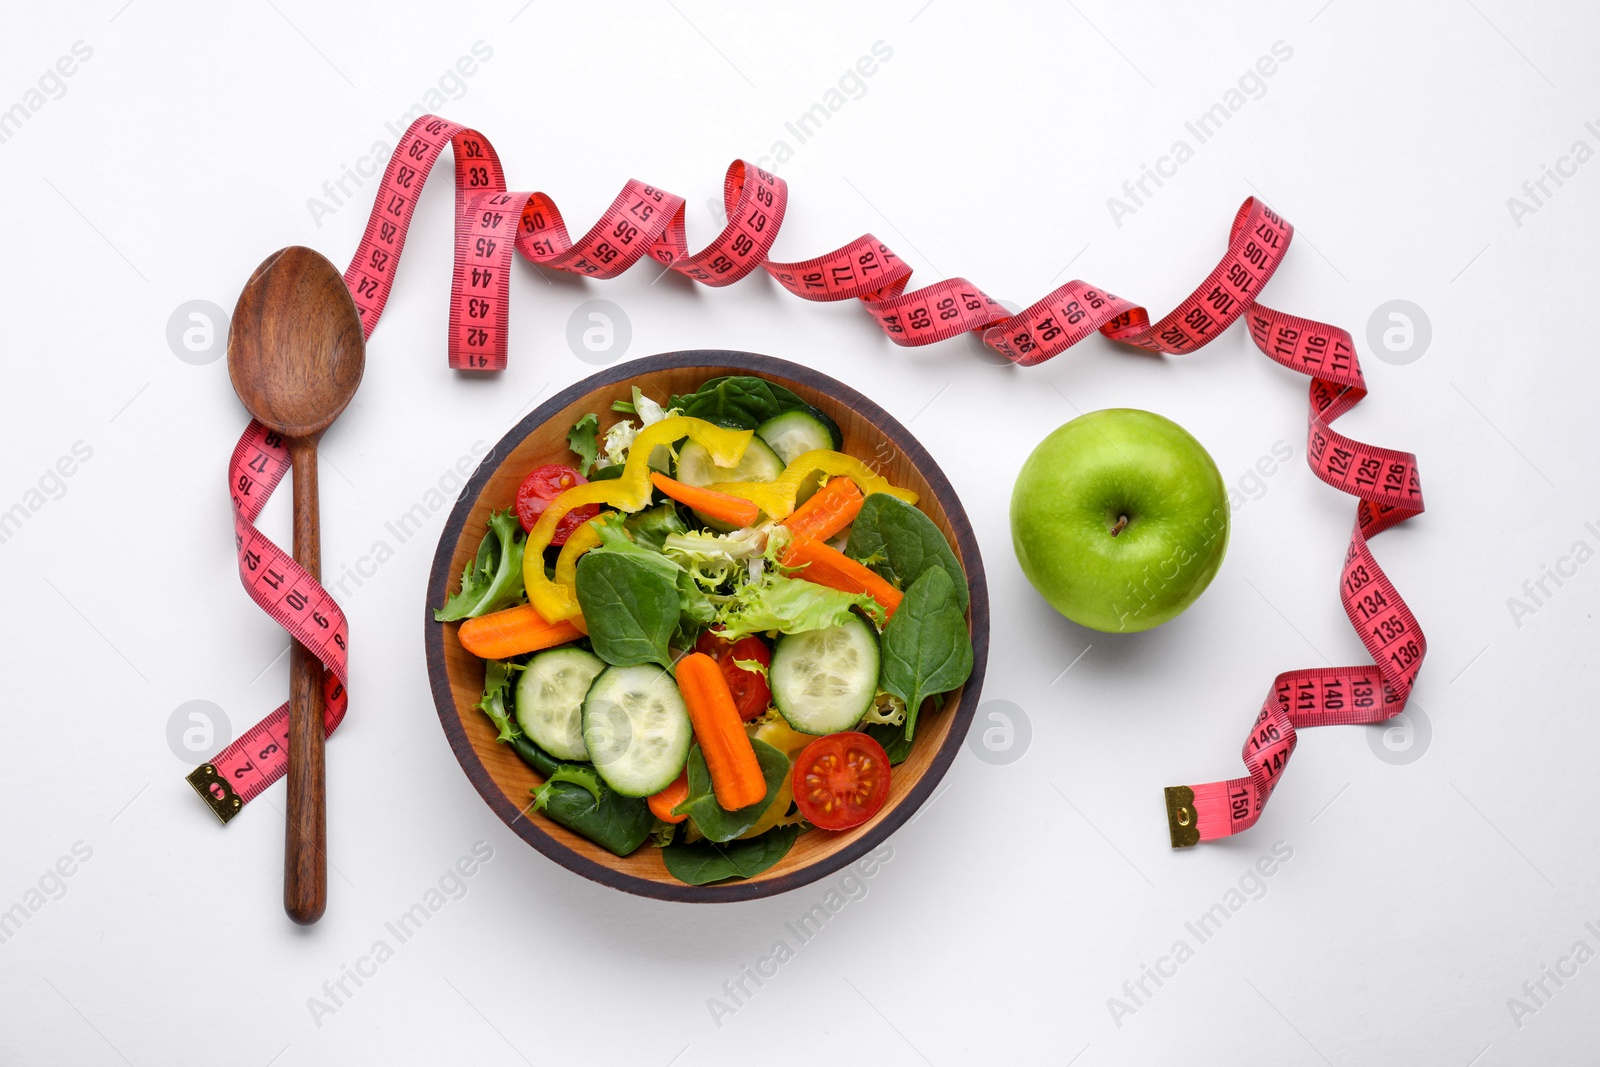 Photo of Measuring tape, salad, apple and spoon on white background, flat lay